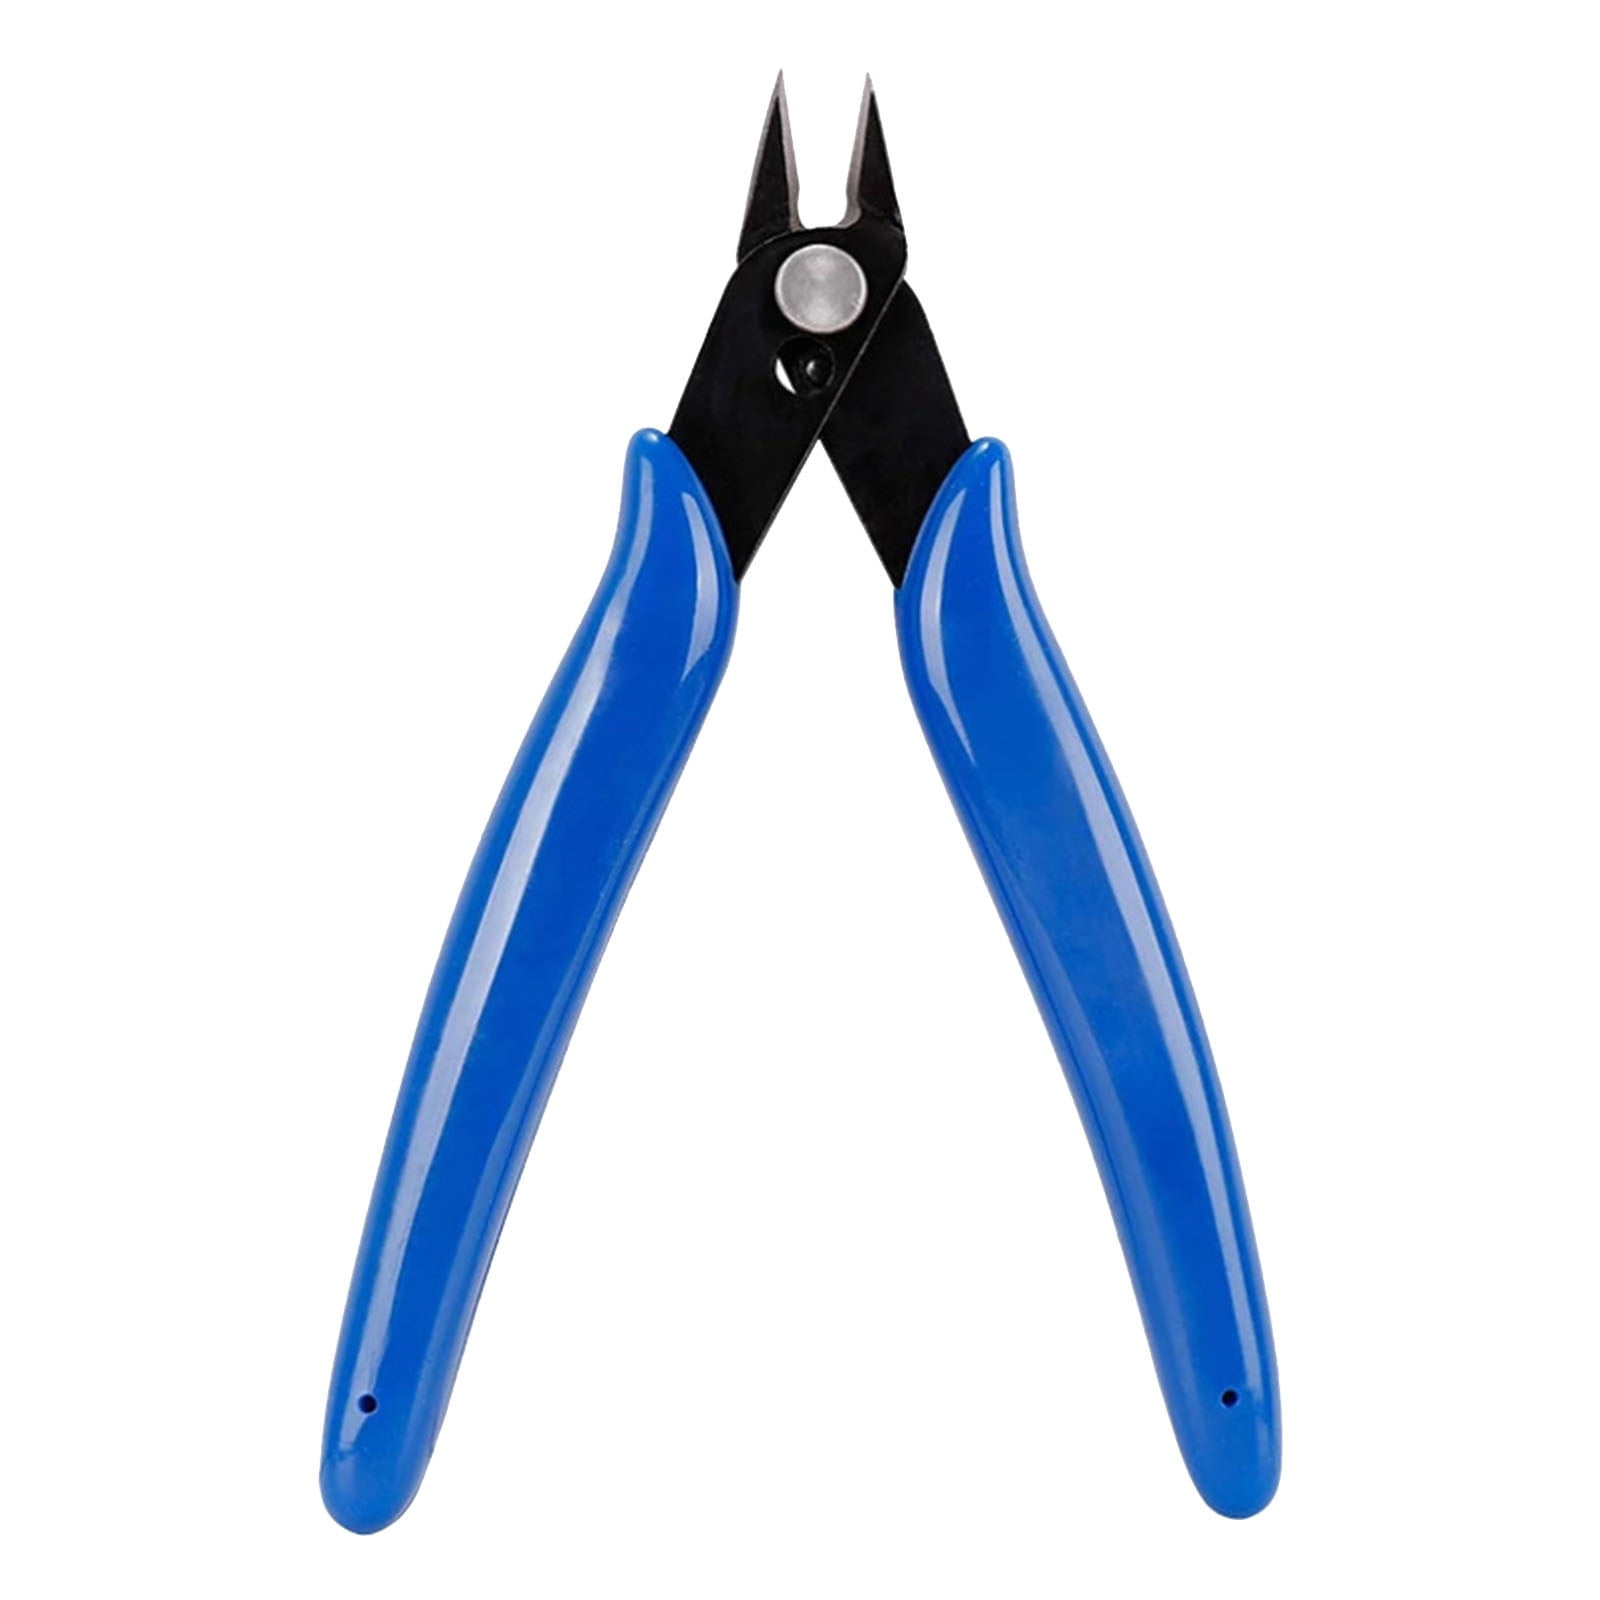 4.5 inch Mini Small Long Nose Side Cutting Pliers Cable Wire Jewelry